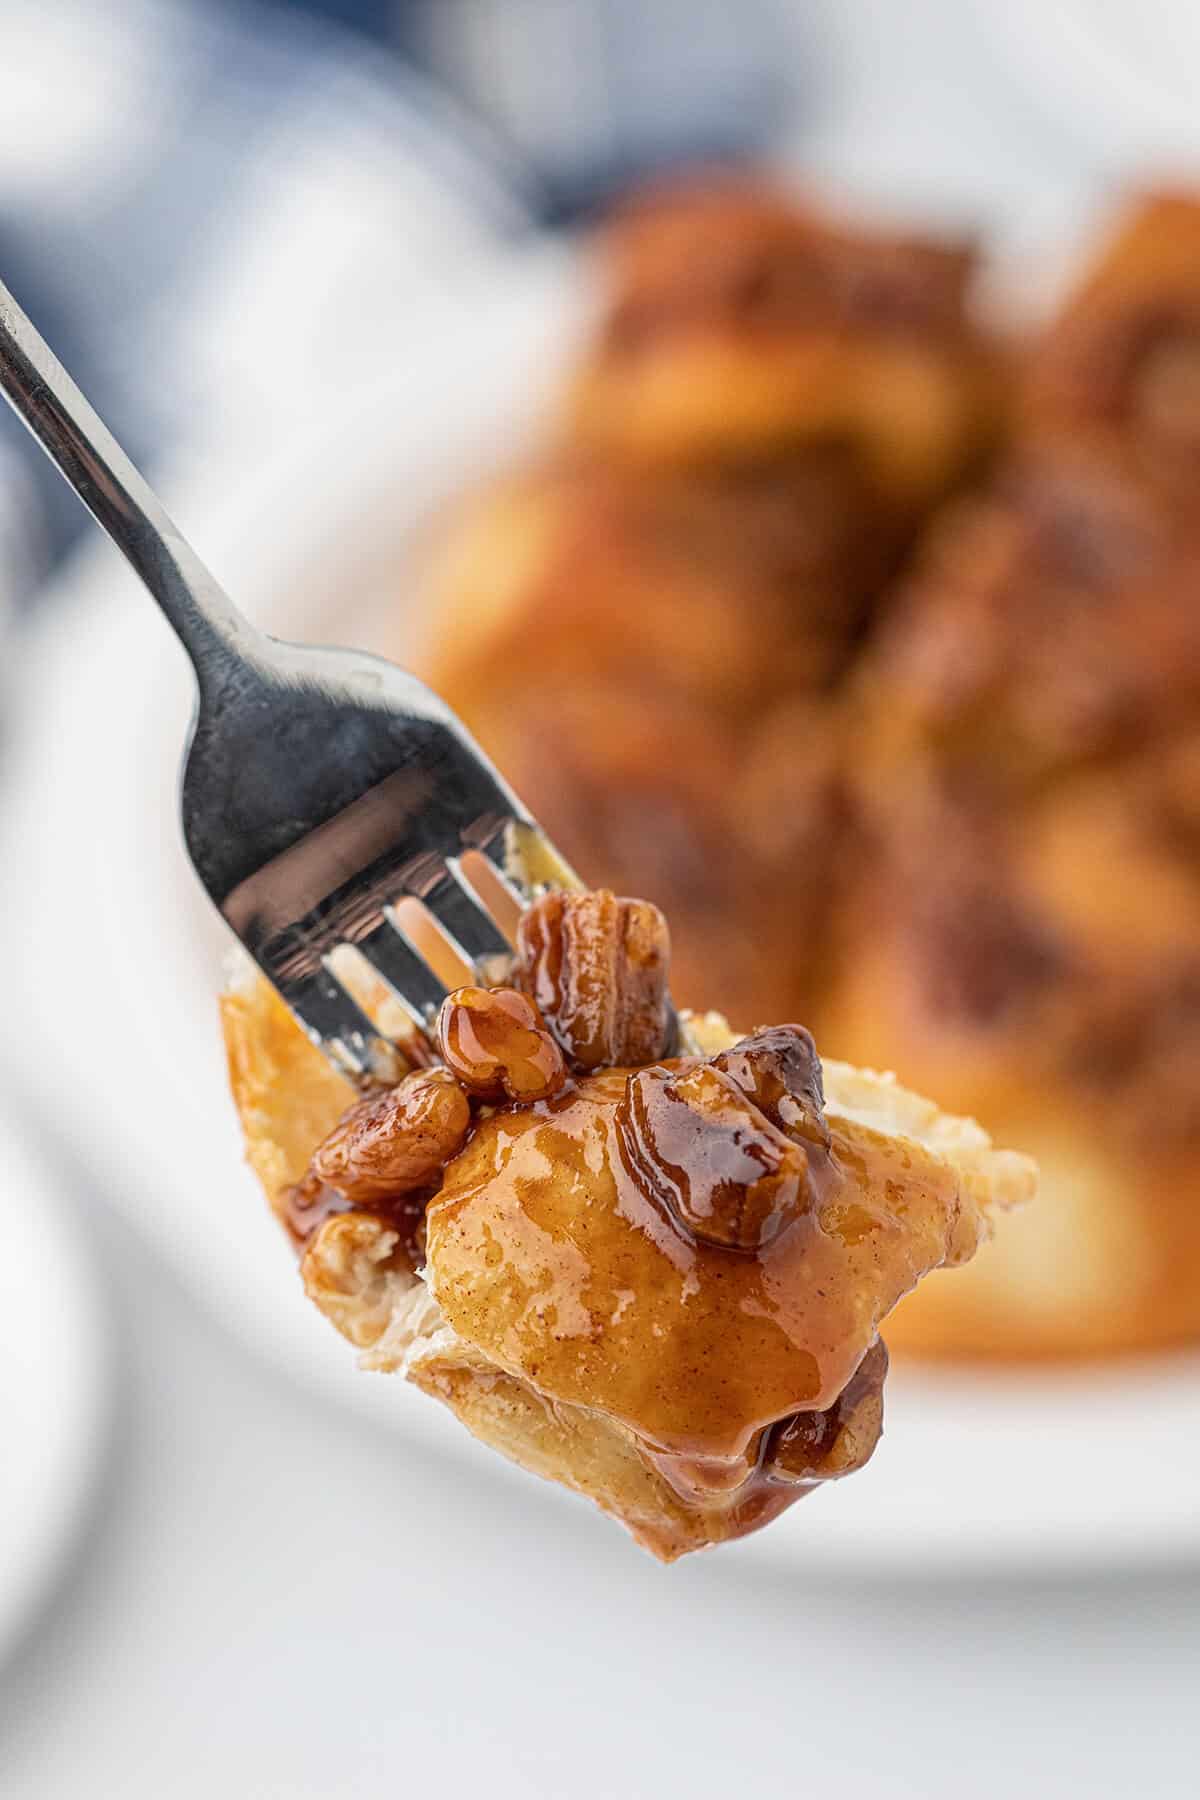 A fork holding one bite of a pecan sticky bun.